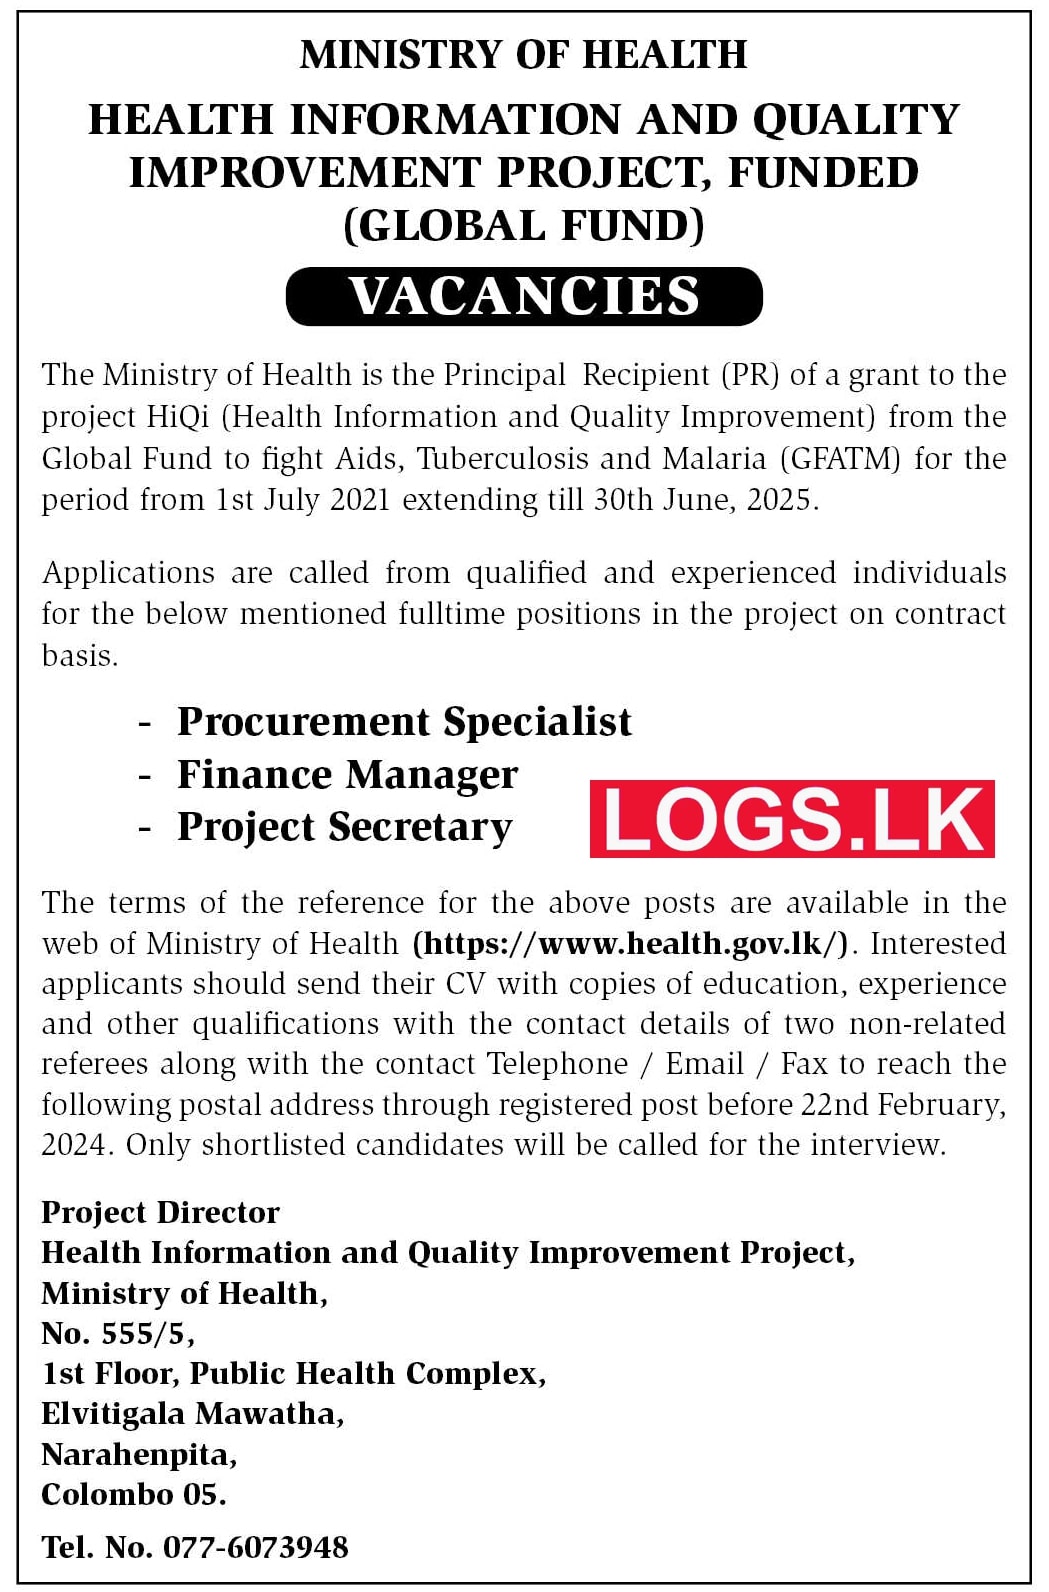 Health Information and Quality Improvement Project Vacancies 2024 Application Form, Details Download